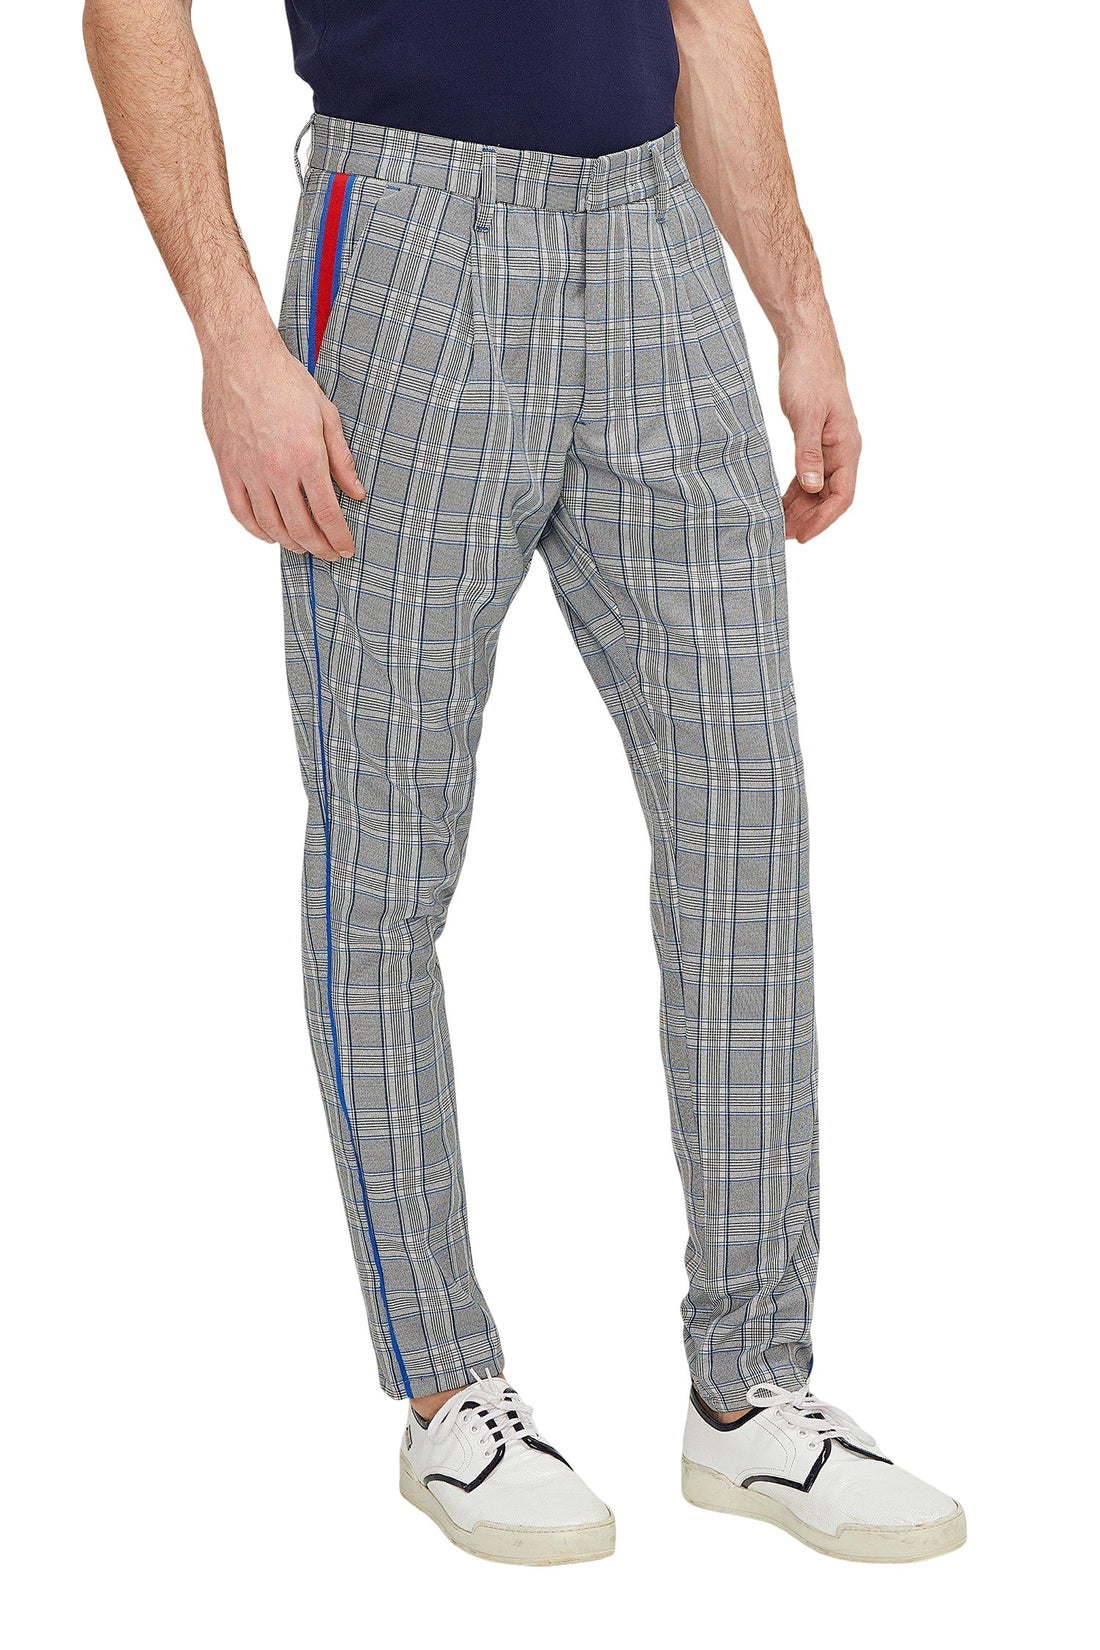 Patterned Slim Fit Causal Trouser - GREY SAX - Ron Tomson